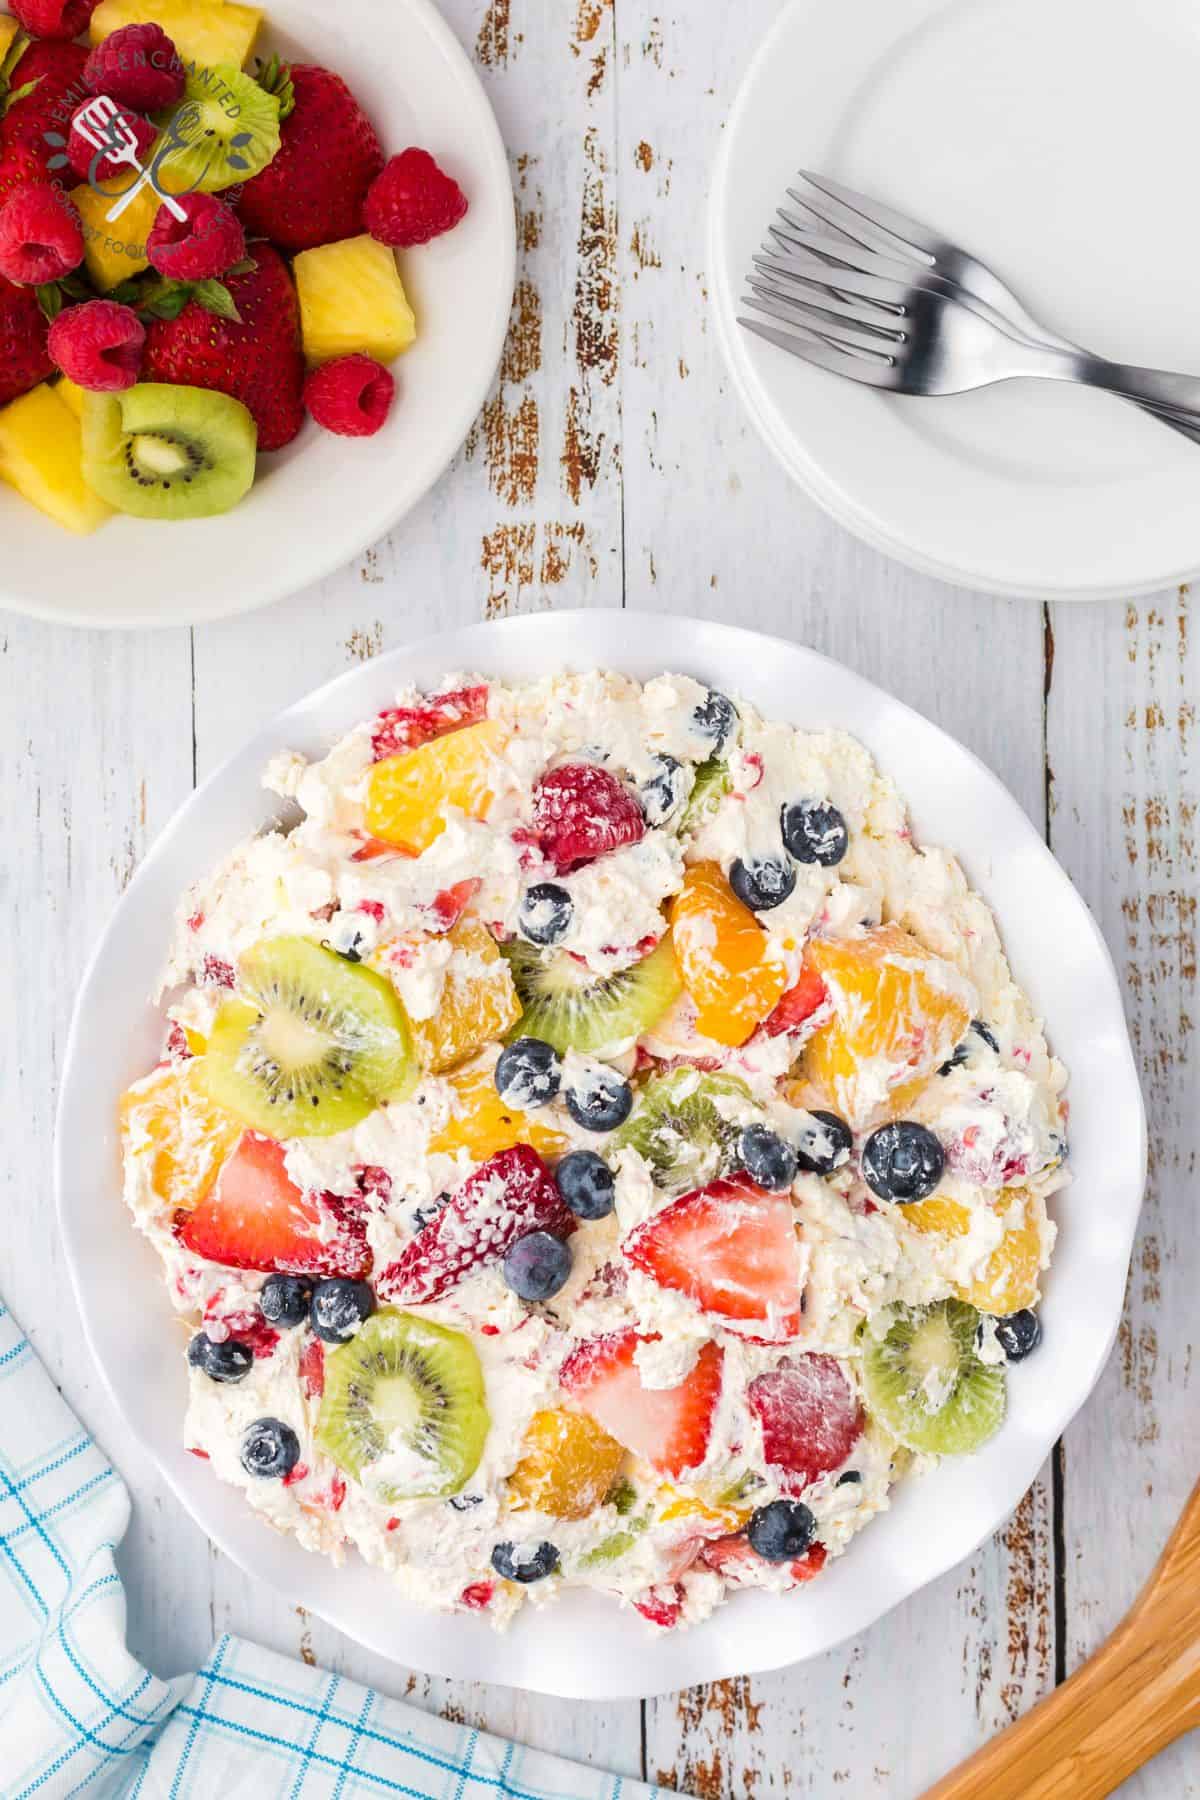 Cheesecake Fruit Salad in a bowl